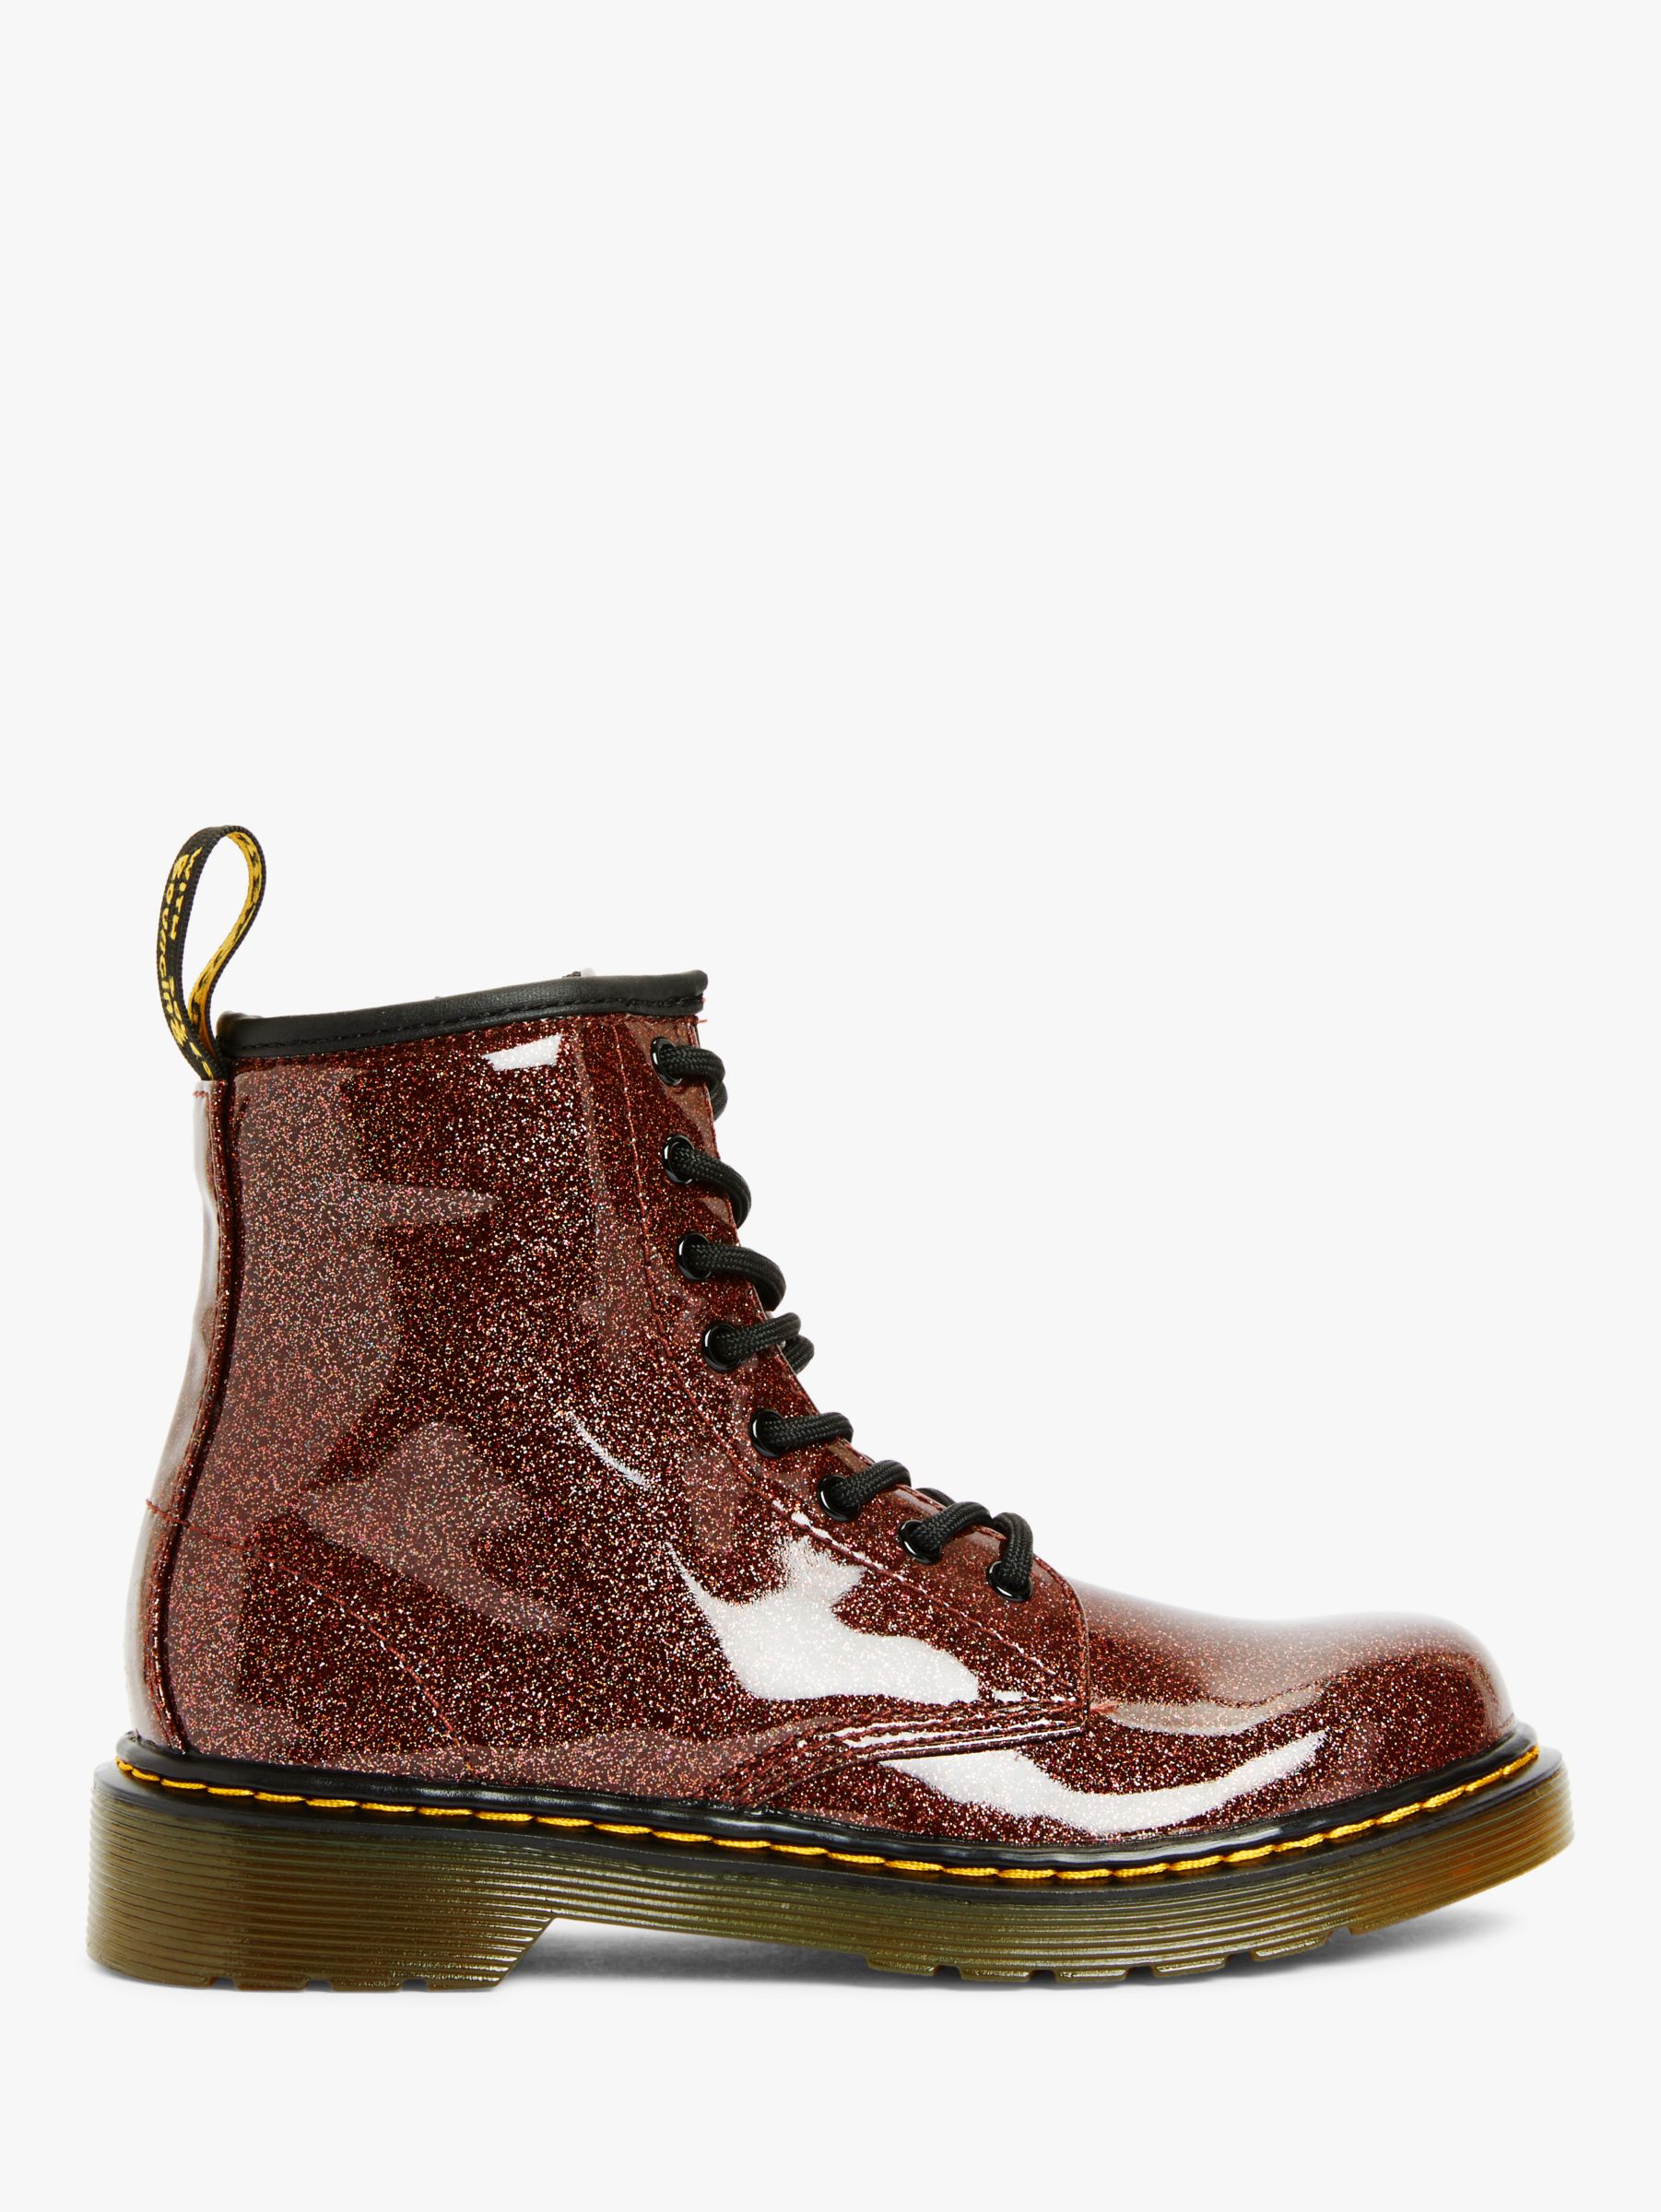 Dr Martens Children's 1460 Coated Glitter Lace Up Boots